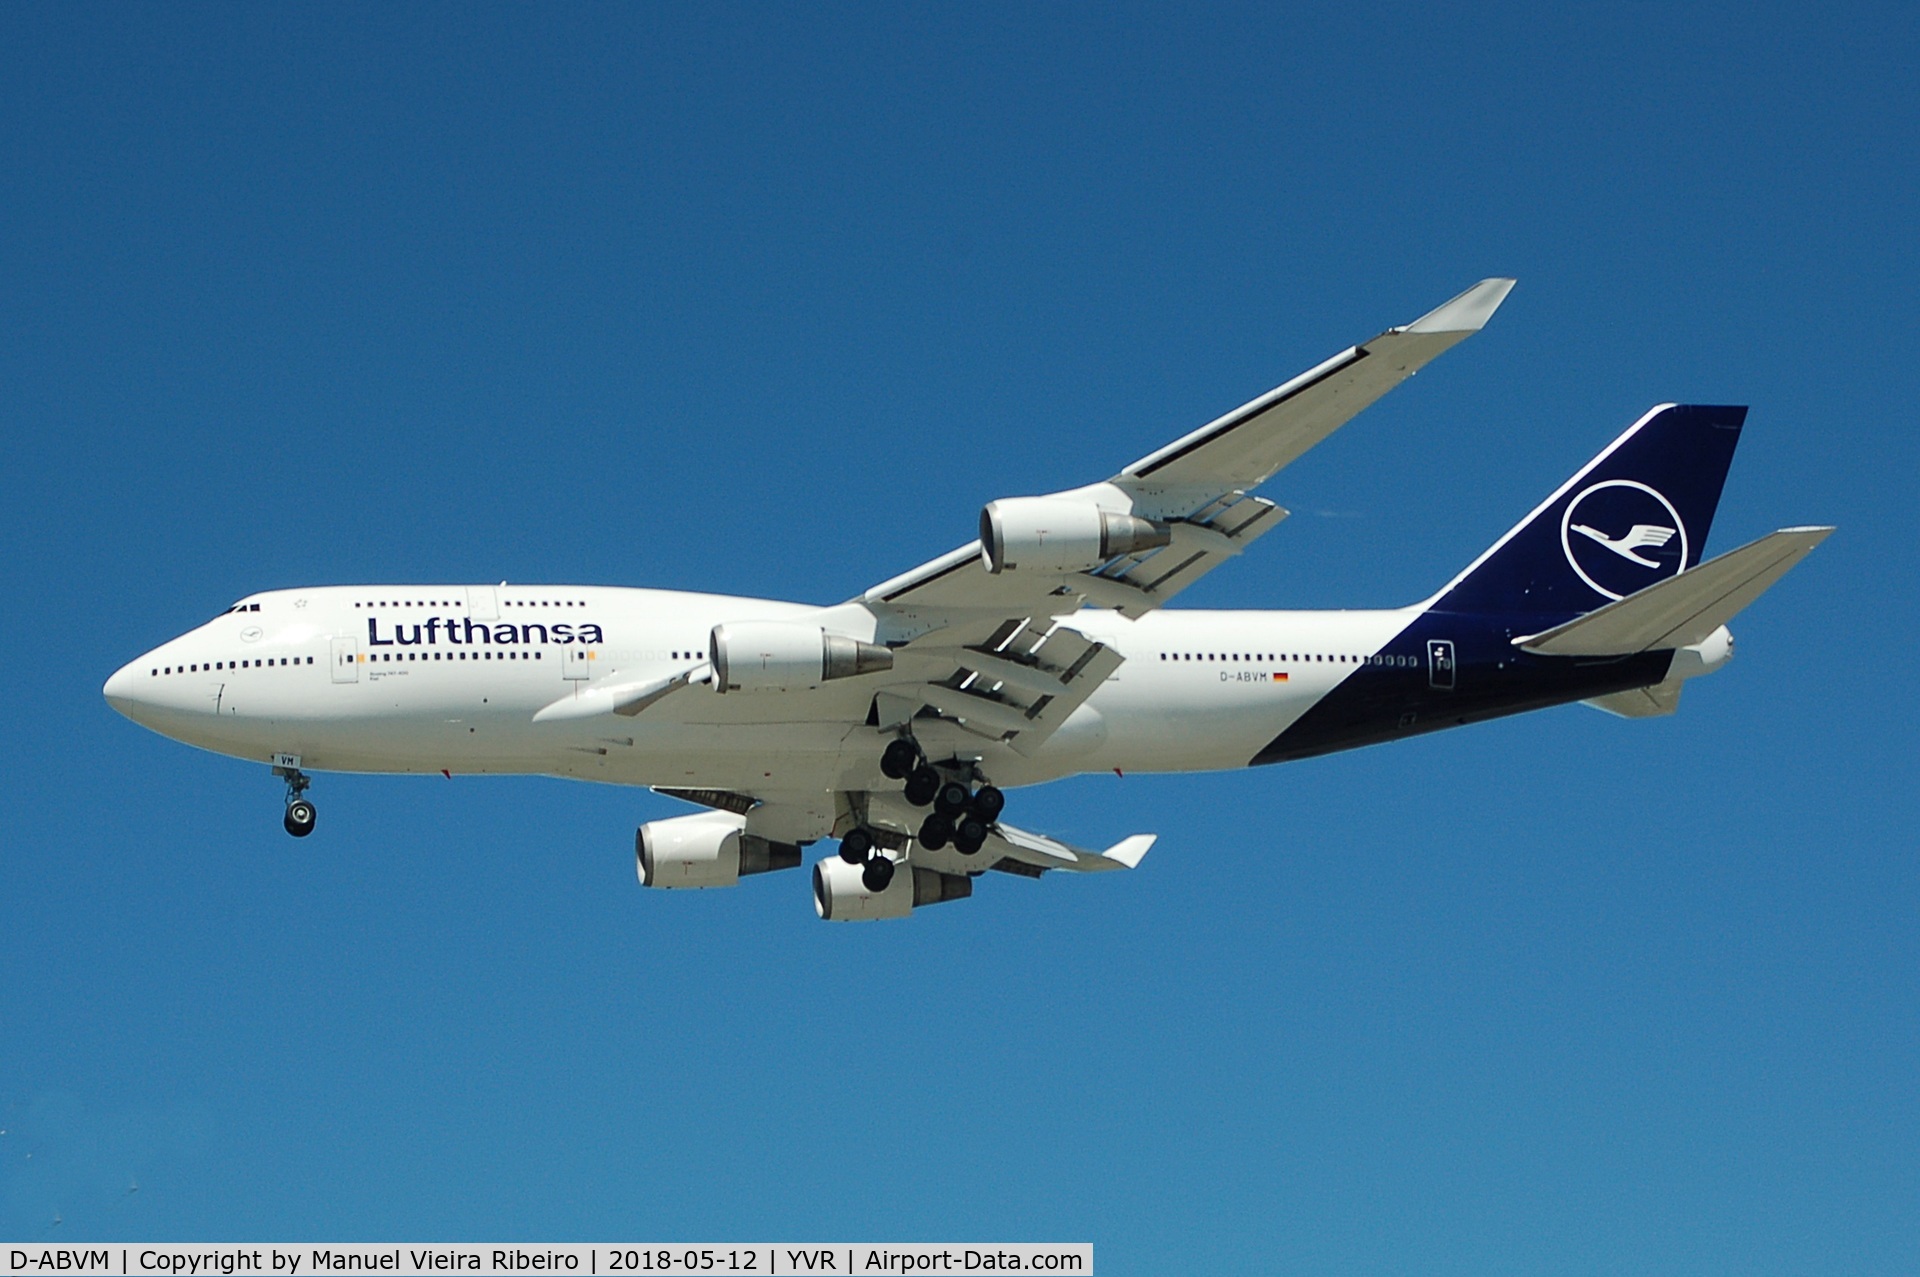 D-ABVM, 1998 Boeing 747-430 C/N 29101, The first Lufthansa B747-430 in the 2018 livery,and the first Lufthansa in the new livery to serve Vancouver.